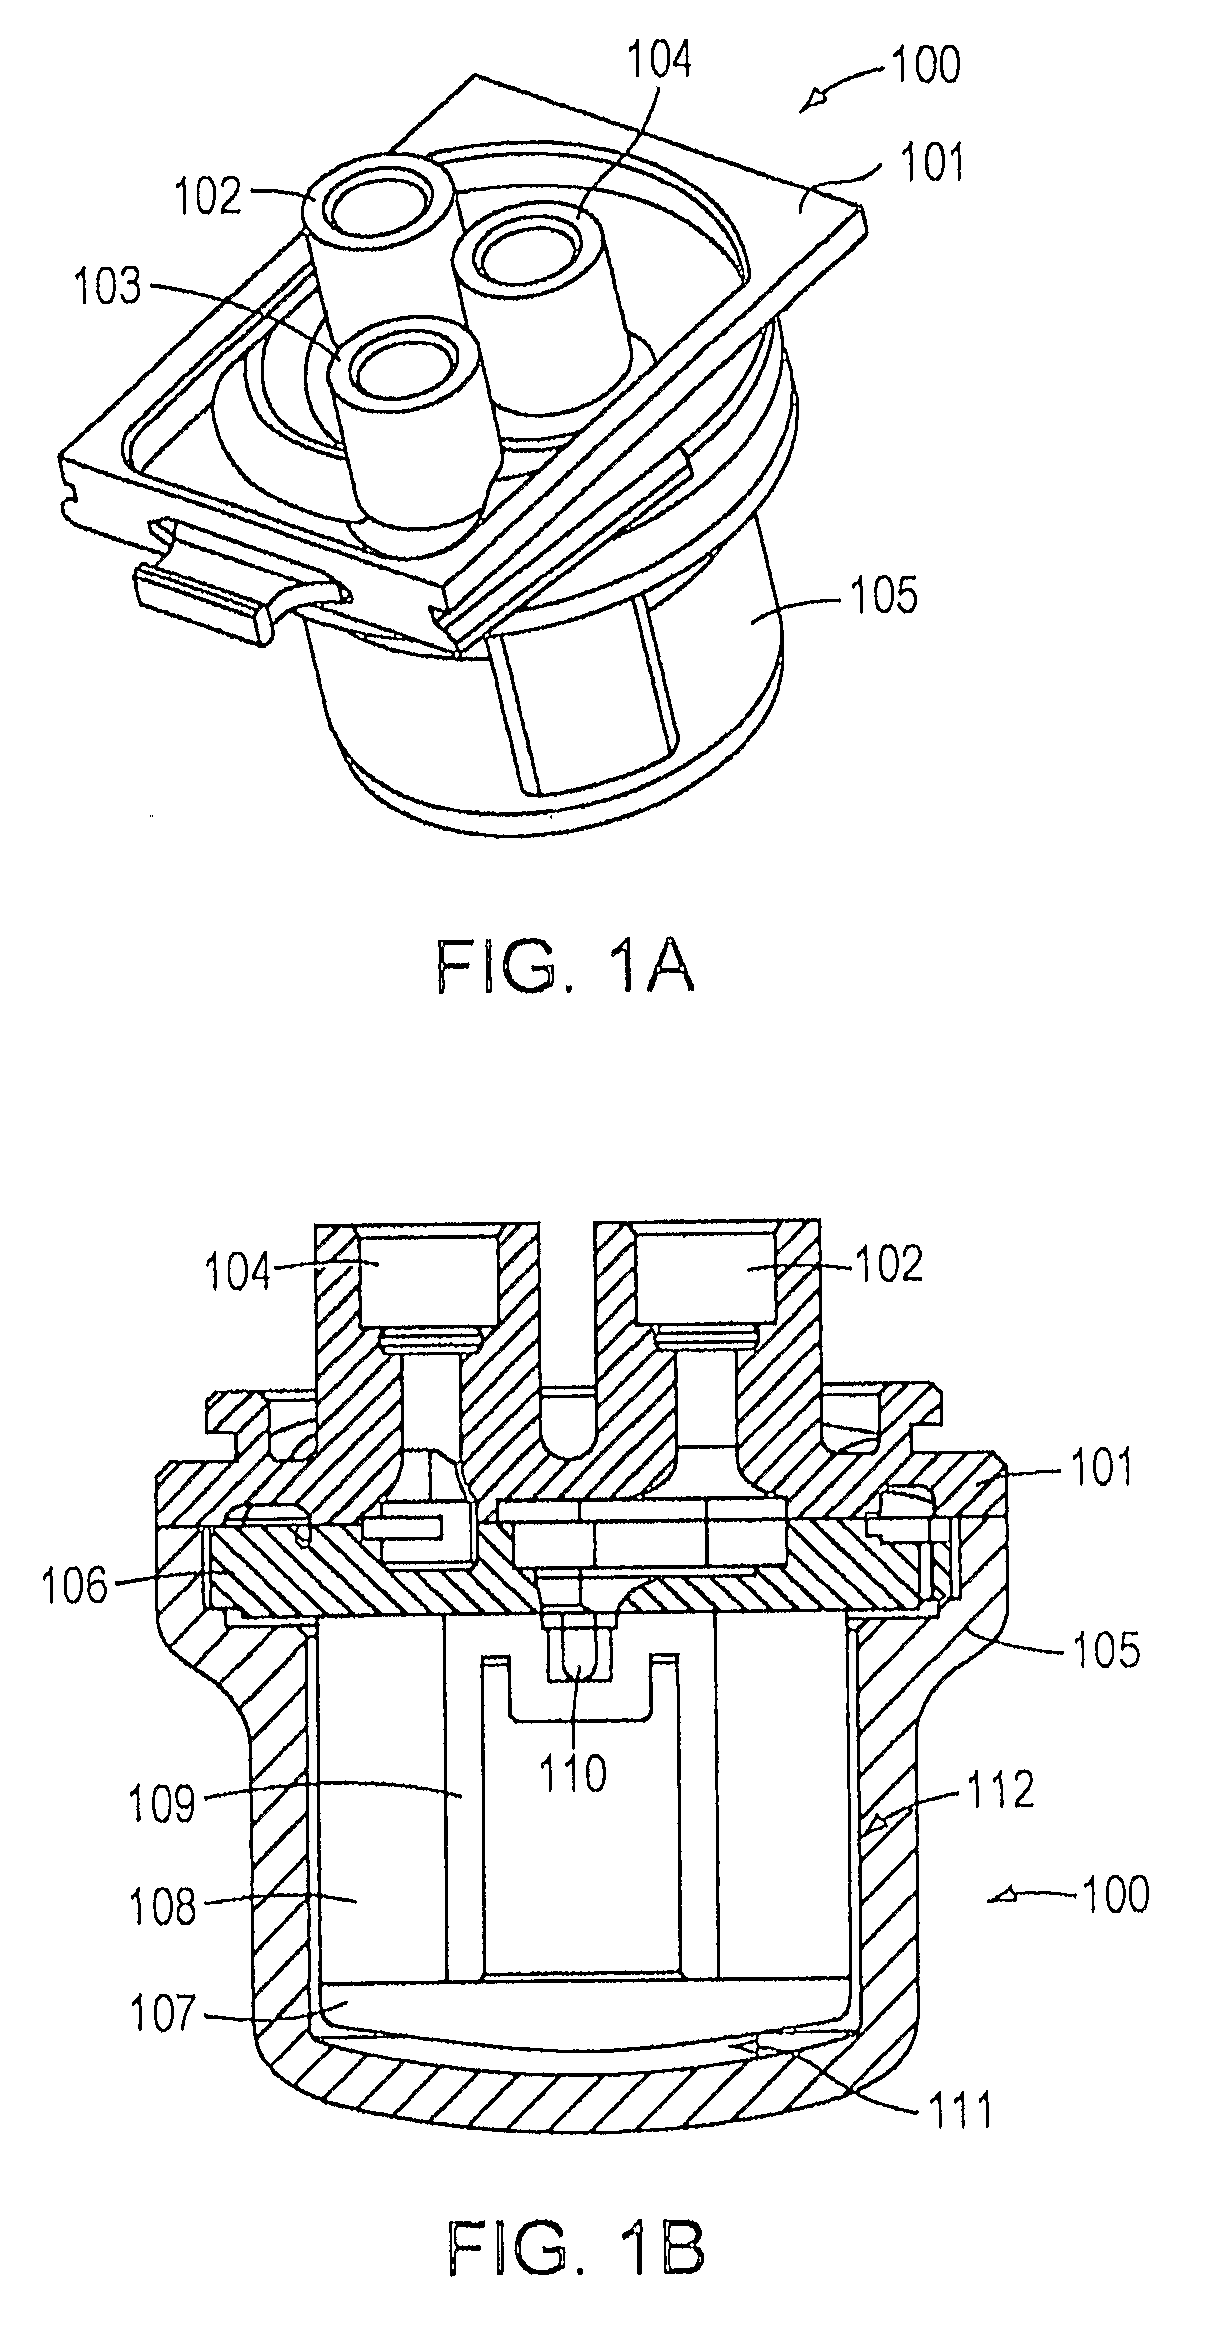 System and Method for Liquid Filtration with Reduced Hold-Up Volume